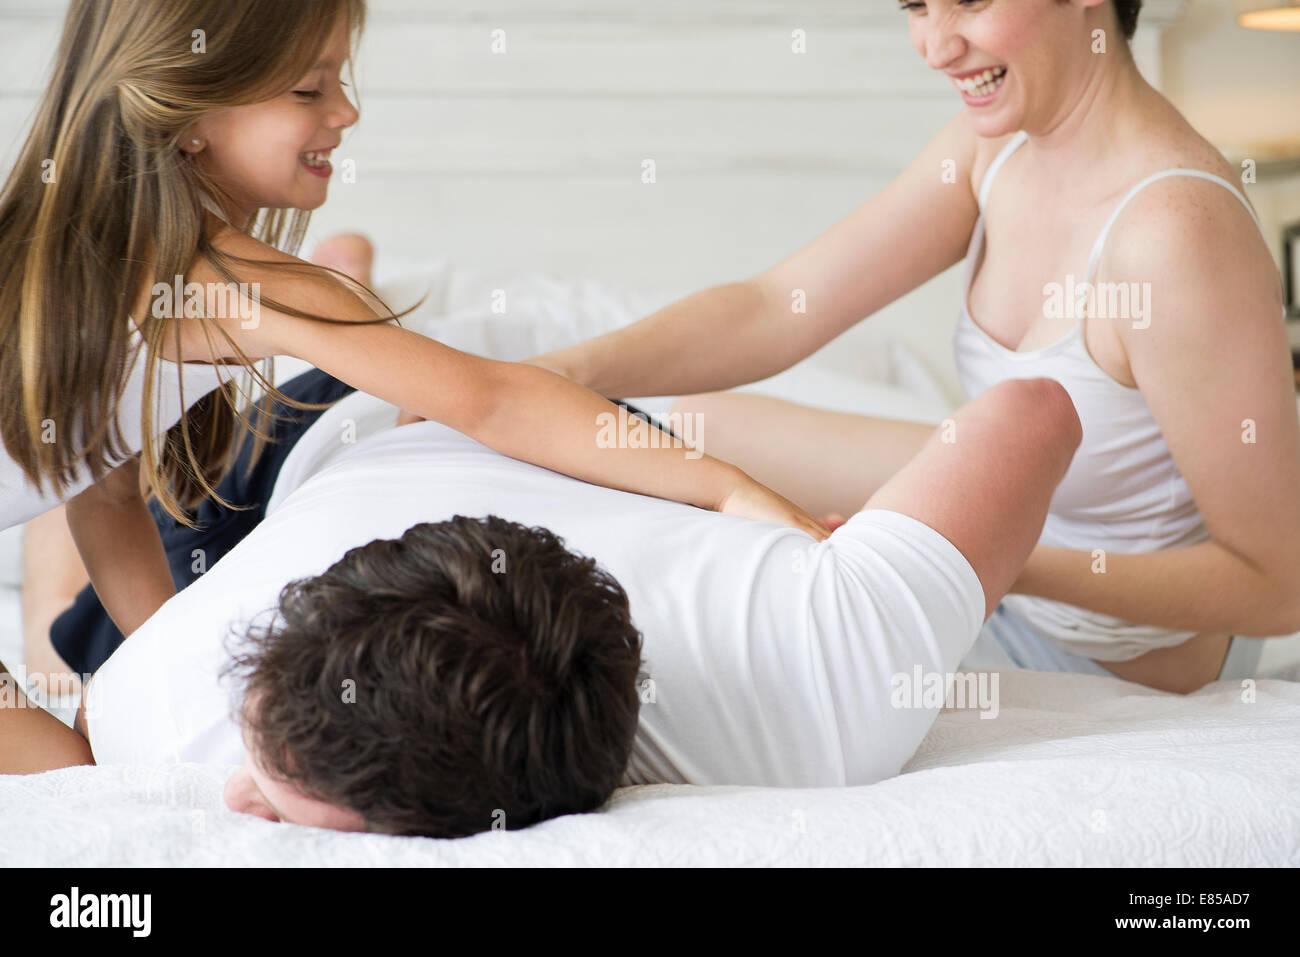 Family playing on bed Stock Photo